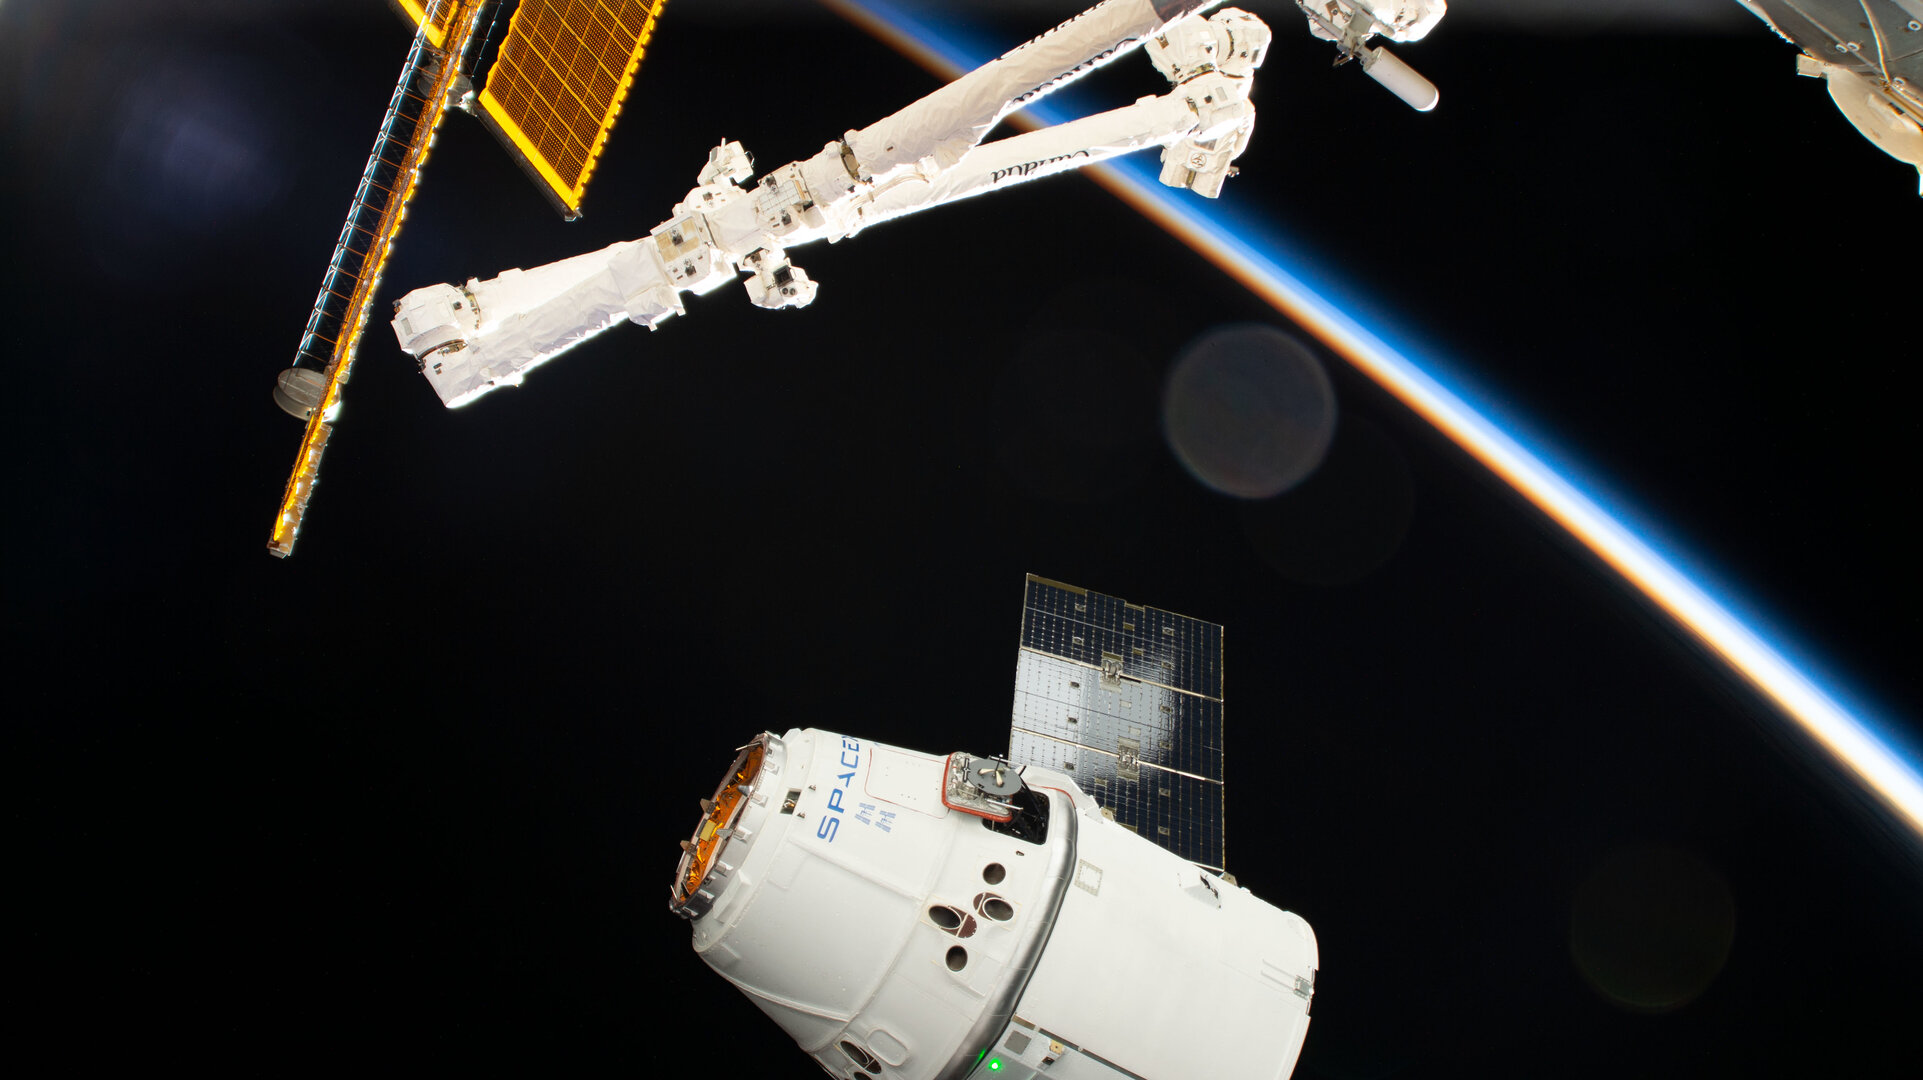 The SpaceX Dragon approaches the International Space Station